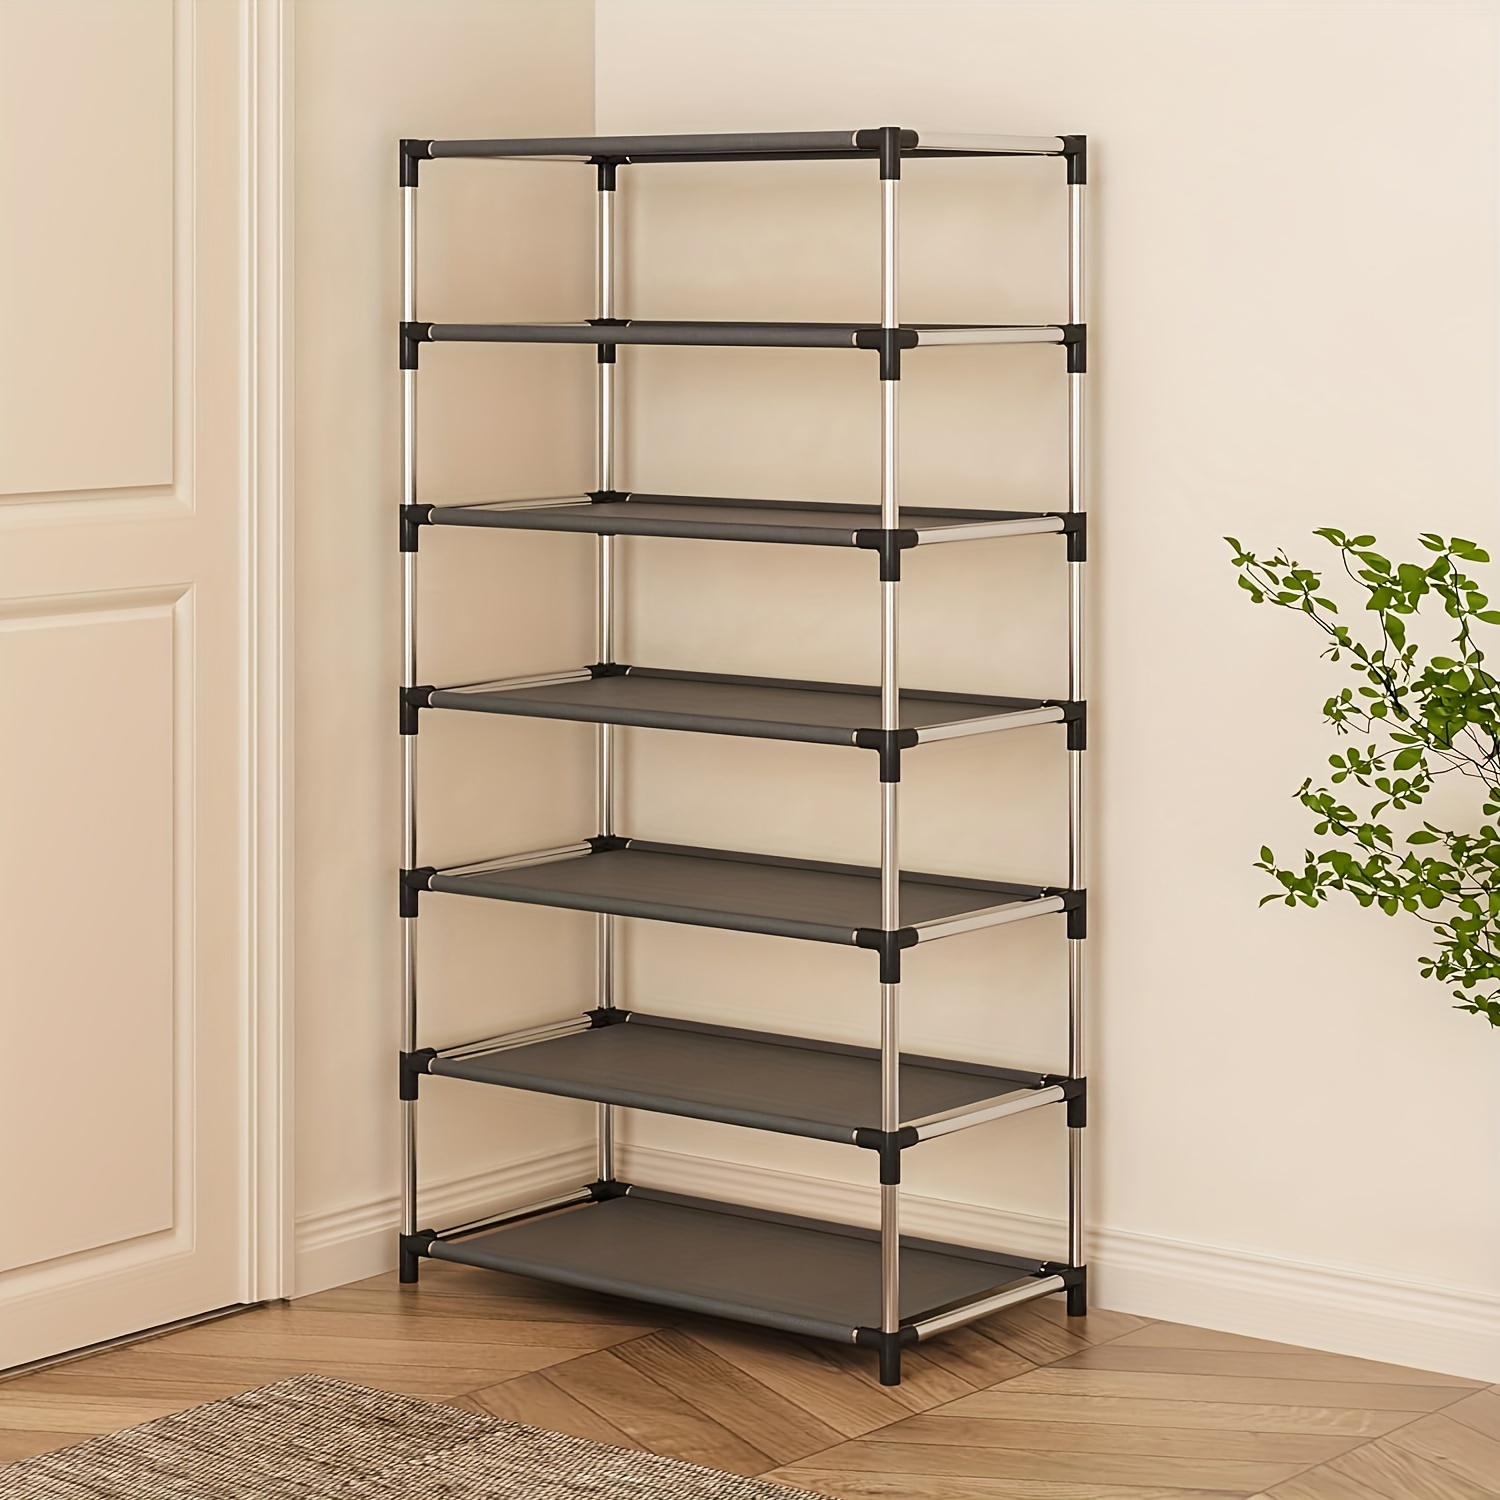 

Space-saving Multi-tier Shoe Rack - Decorative & Functional Storage For Living Room, Bedroom, Hallway - Easy Assembly Metal Organizer